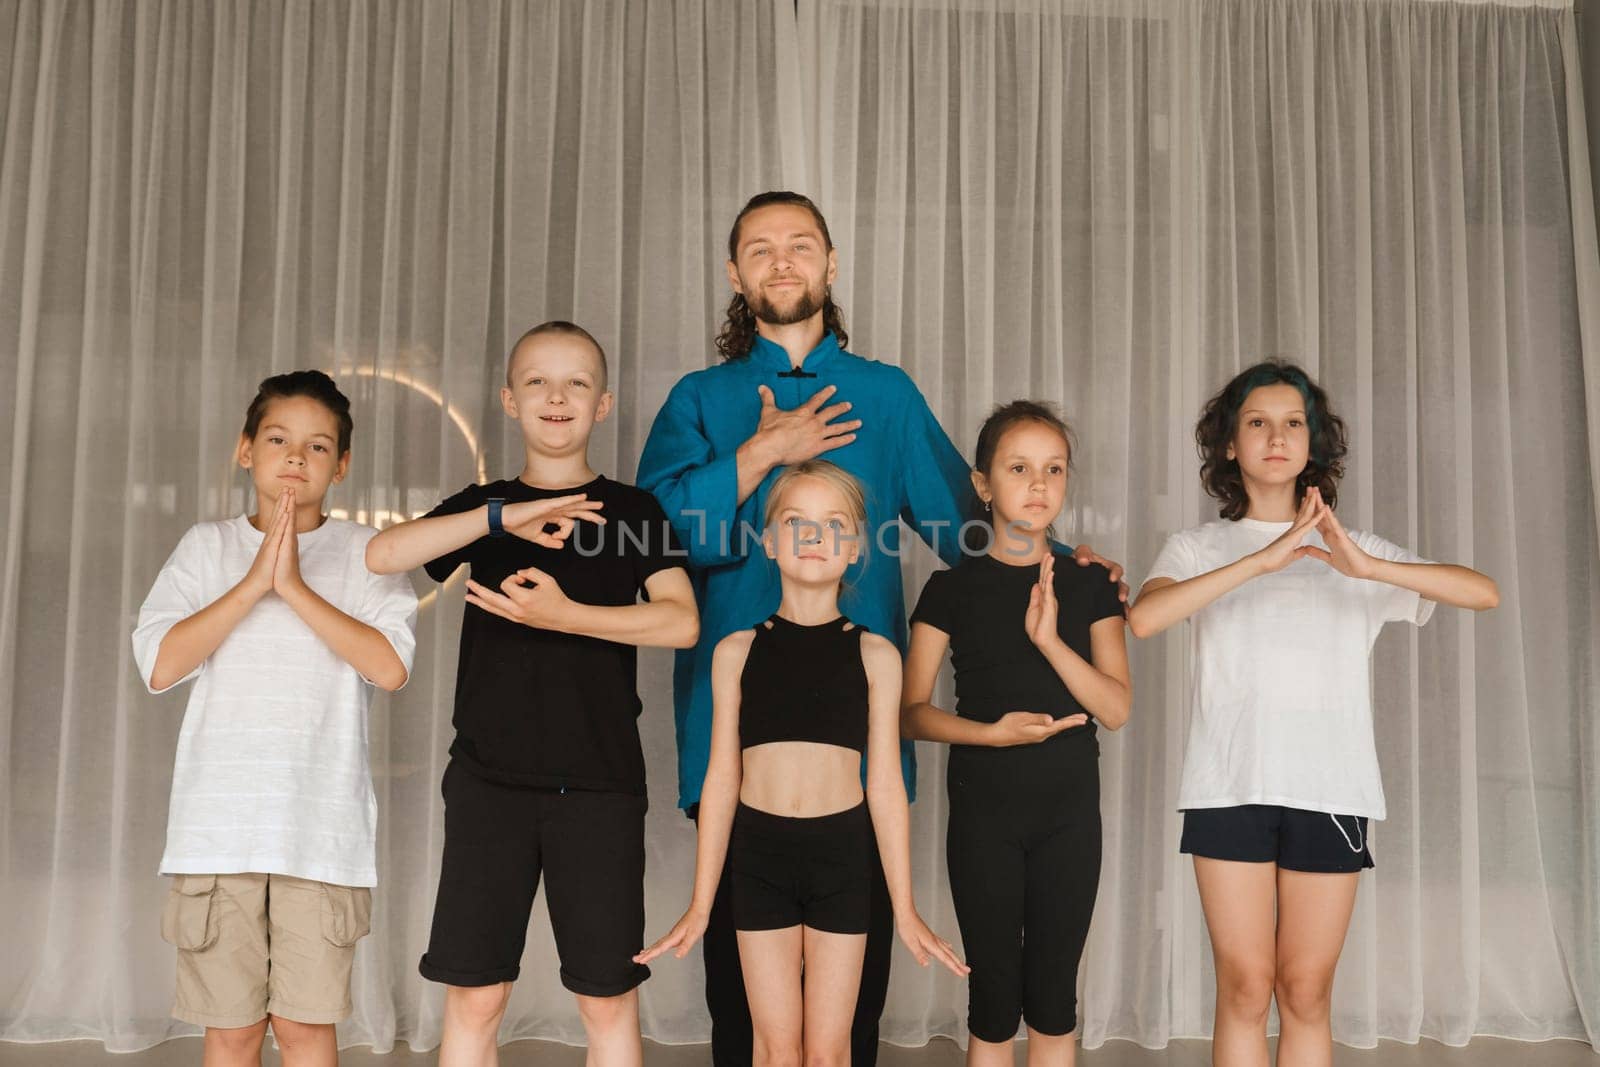 A joint portrait of a yoga coach and children standing in a fitness room by Lobachad